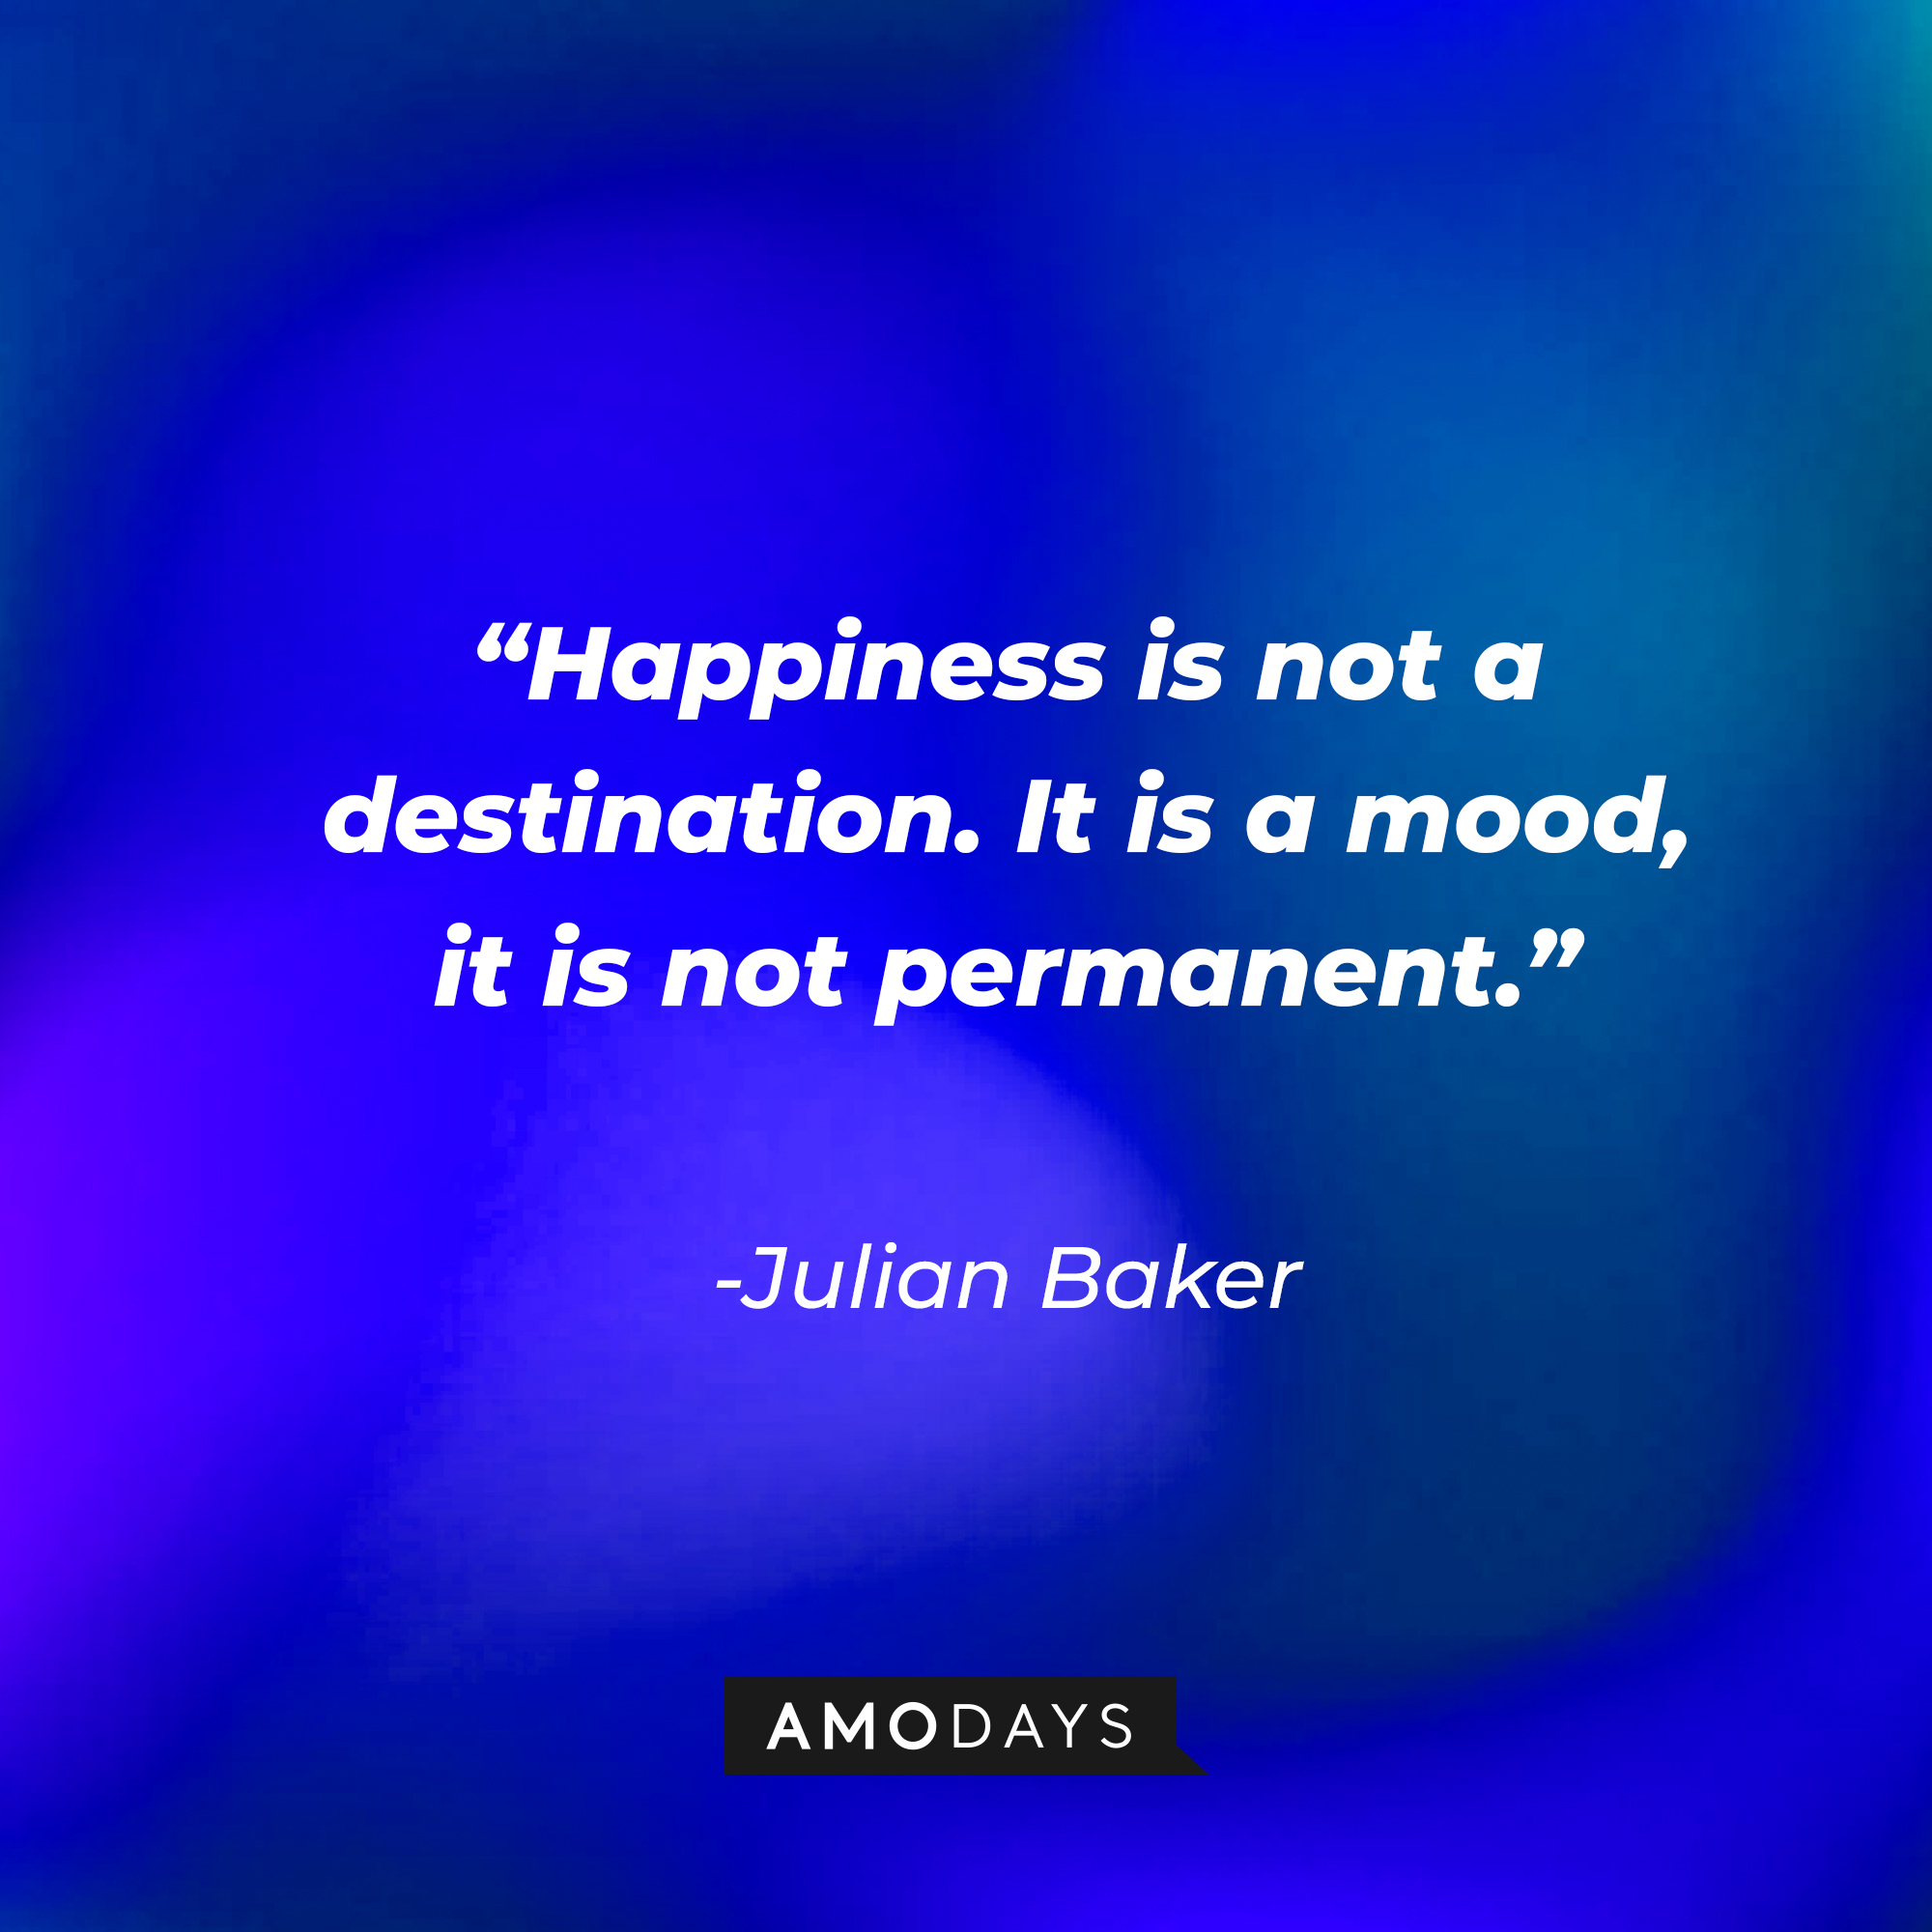 Julian Baker’s quote:“Happiness is not a destination. It is a mood, it is not permanent.” | Source: AmoDays